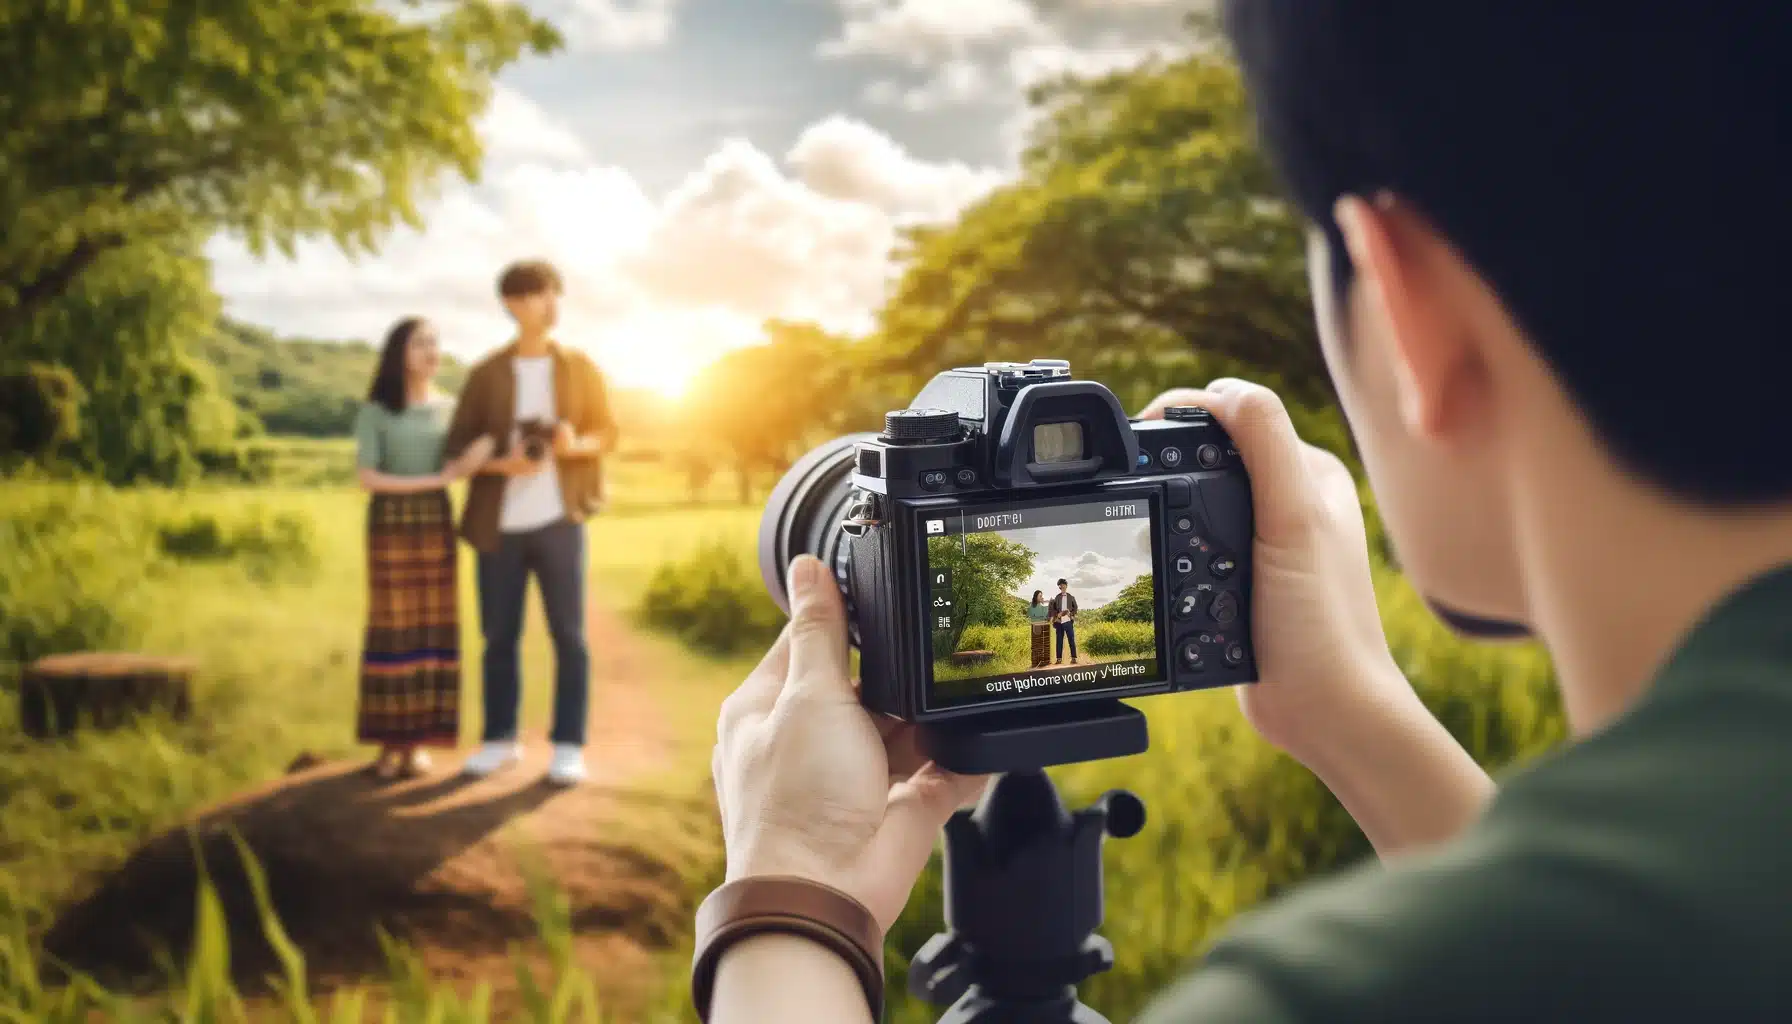 Photographer capturing a portrait of two people outdoors using Orifice Precedence Way, with a blurred background emphasizing the subjects.